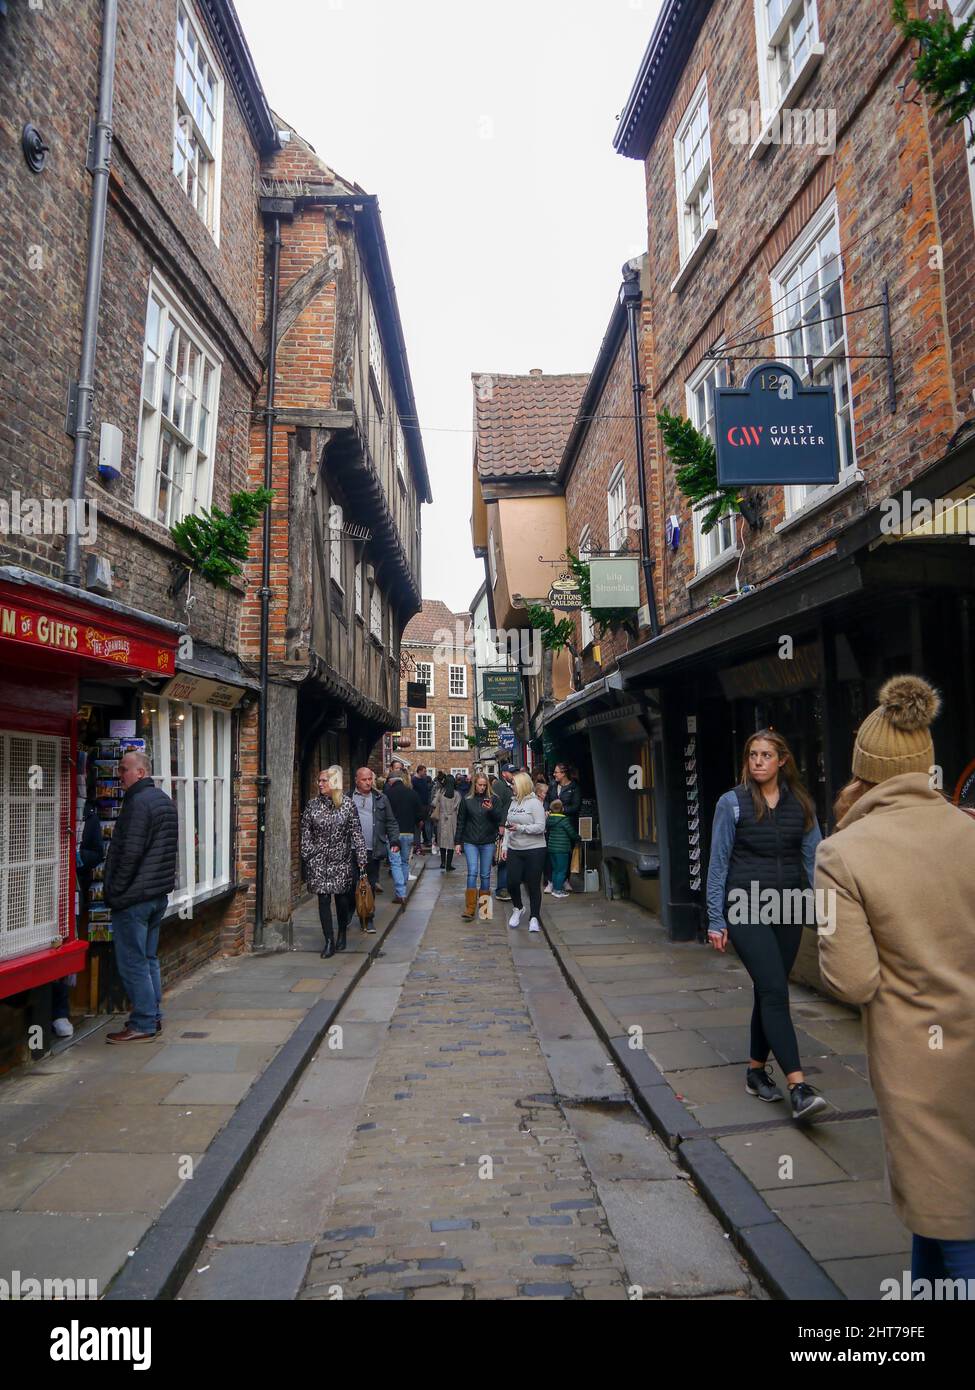 Medieval buildings  in the shambles, York, England Stock Photo